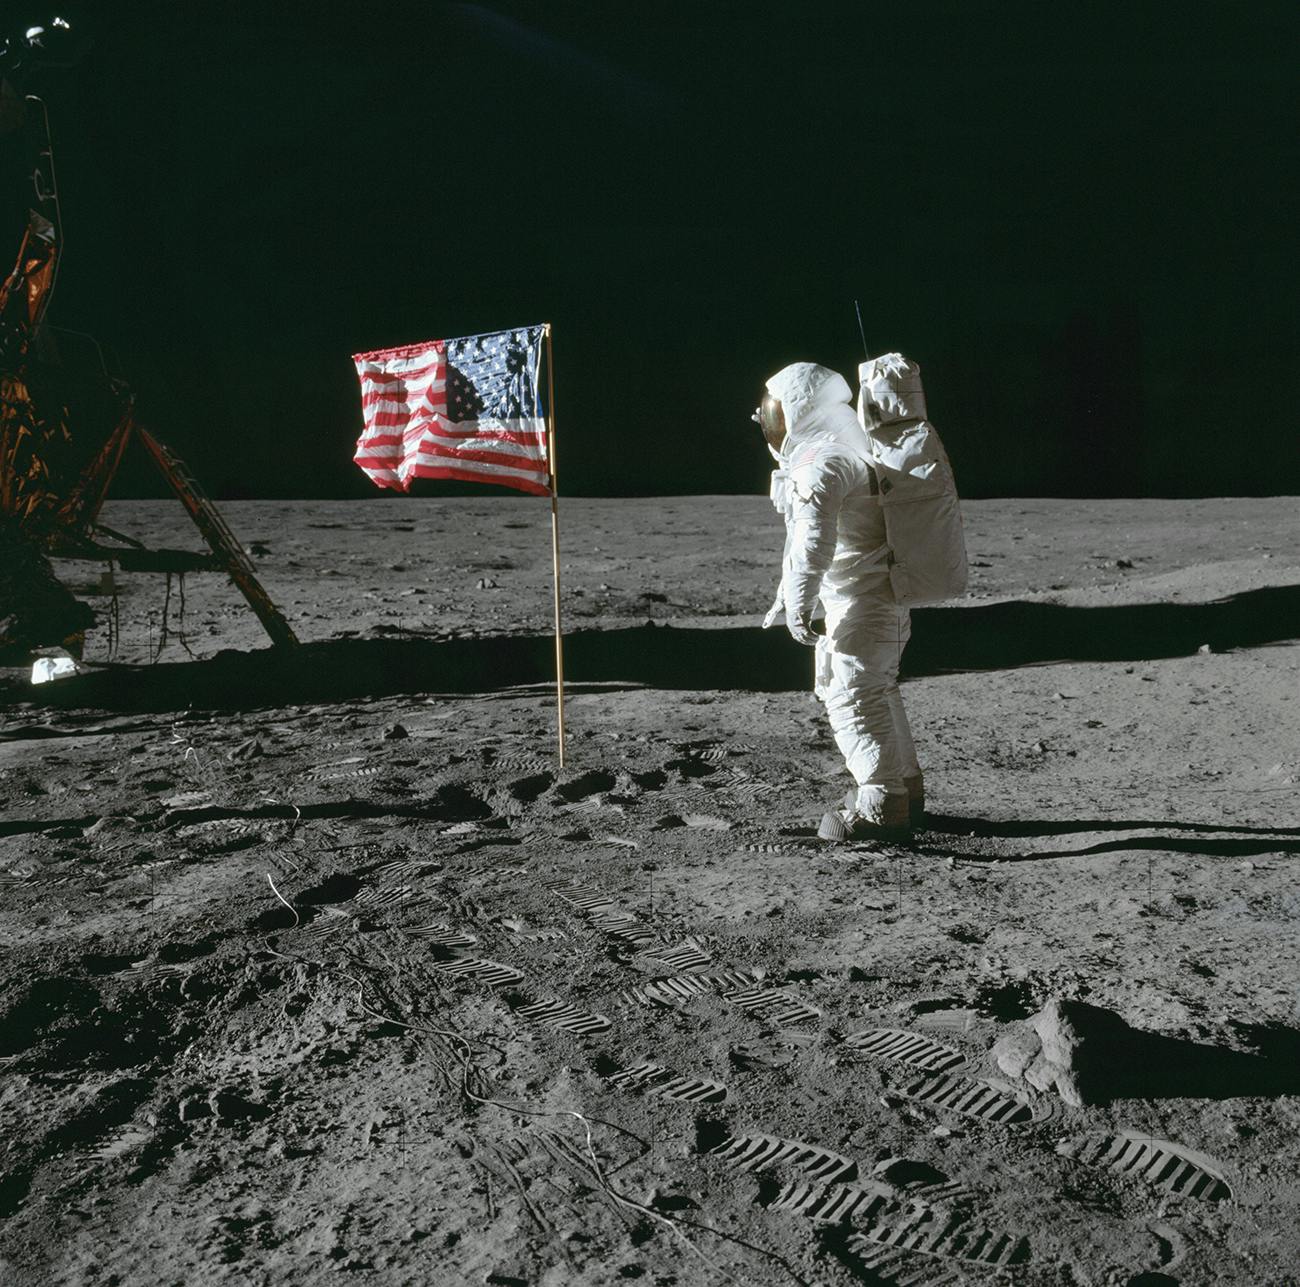 Astronaut Edwin E. Aldrin Jr., lunar module pilot of the first lunar landing mission, poses for a photograph beside the deployed U.S. flag during Apollo 11 extravehicular activity on the lunar surface on July 20, 1969.